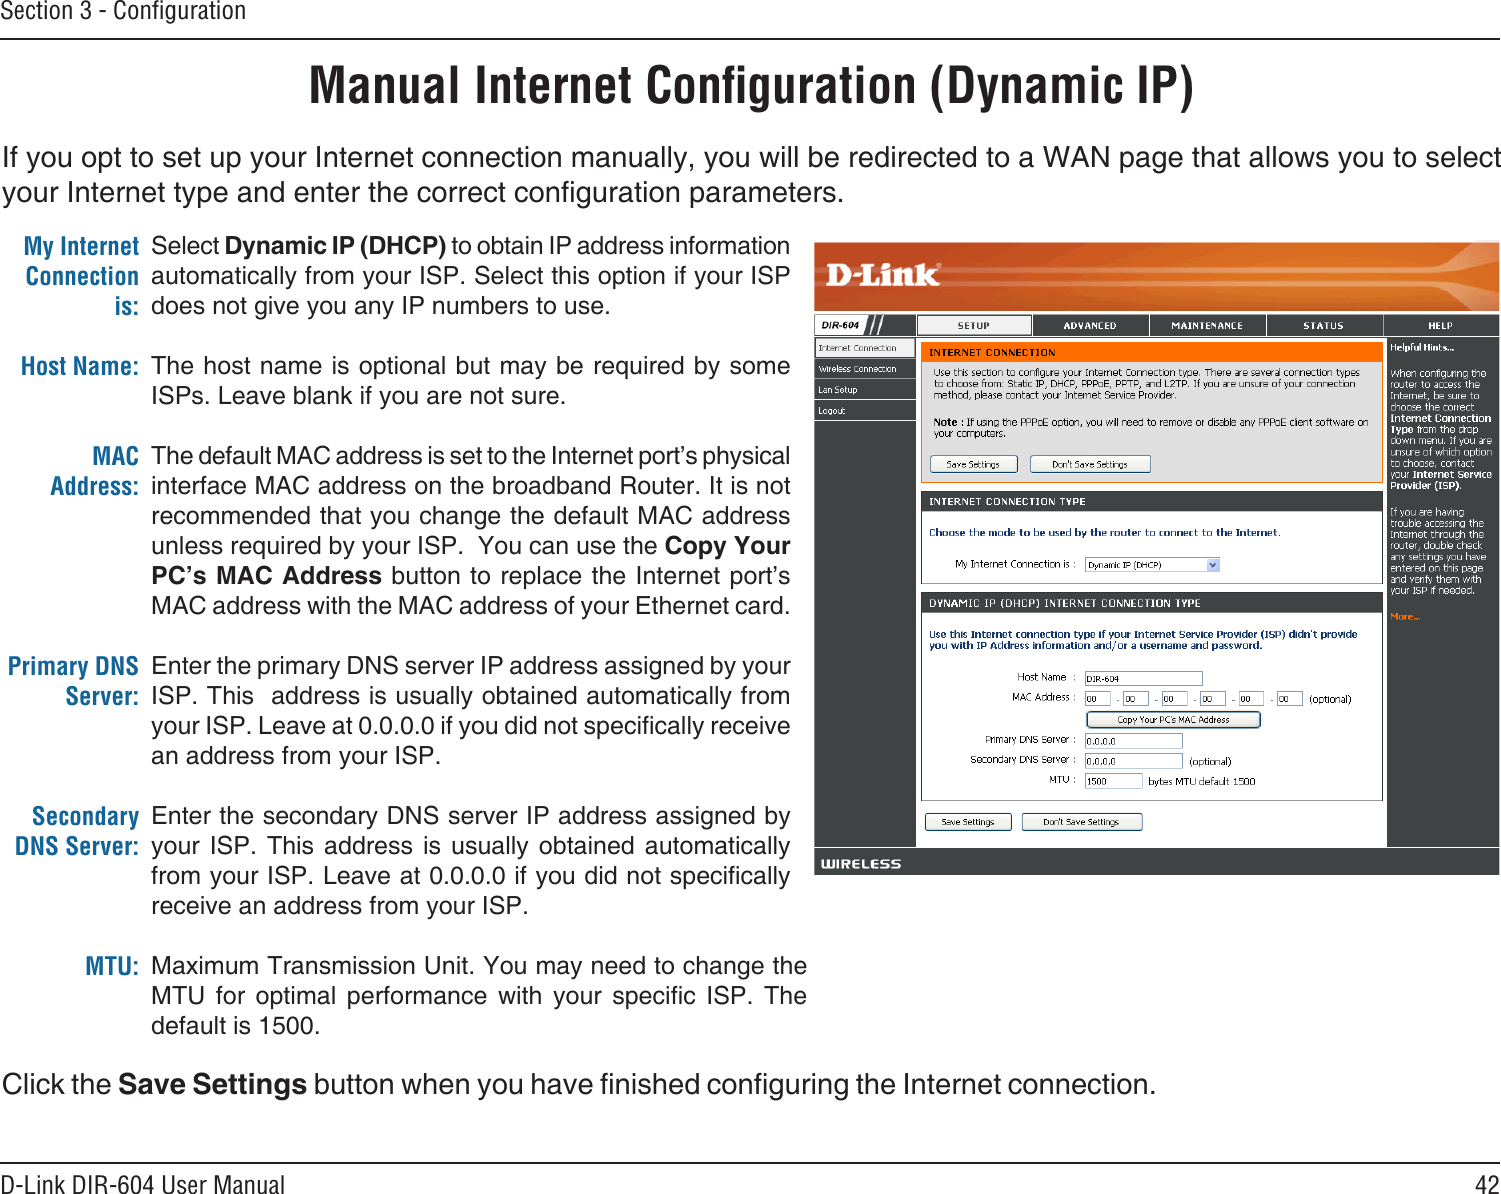 42D-Link DIR-604 User ManualSection 3 - ConﬁgurationIf you opt to set up your Internet connection manually, you will be redirected to a WAN page that allows you to select your Internet type and enter the correct conguration parameters. Manual Internet Conﬁguration (Dynamic IP)Select Dynamic IP (DHCP) to obtain IP address information automatically from your ISP. Select this option if your ISP does not give you any IP numbers to use.The host name is optional but may be required by some ISPs. Leave blank if you are not sure.The default MAC address is set to the Internet port’s physical interface MAC address on the broadband Router. It is not recommended that you change the default MAC address unless required by your ISP.  You can use the Copy Your PC’s MAC Address button to replace the Internet port’s MAC address with the MAC address of your Ethernet card.Enter the primary DNS server IP address assigned by your ISP. This  address is usually obtained automatically from your ISP. Leave at 0.0.0.0 if you did not specically receive an address from your ISP.Enter the secondary DNS server IP address assigned by your  ISP.  This address  is  usually  obtained  automatically from your ISP. Leave at 0.0.0.0 if you did not specically receive an address from your ISP.Maximum Transmission Unit. You may need to change the MTU  for  optimal  performance  with  your  specic  ISP.  The default is 1500.My Internet Connection is:Host Name: MAC Address:Primary DNS Server:Secondary DNS Server: MTU:Click the Save Settings button when you have nished conguring the Internet connection.